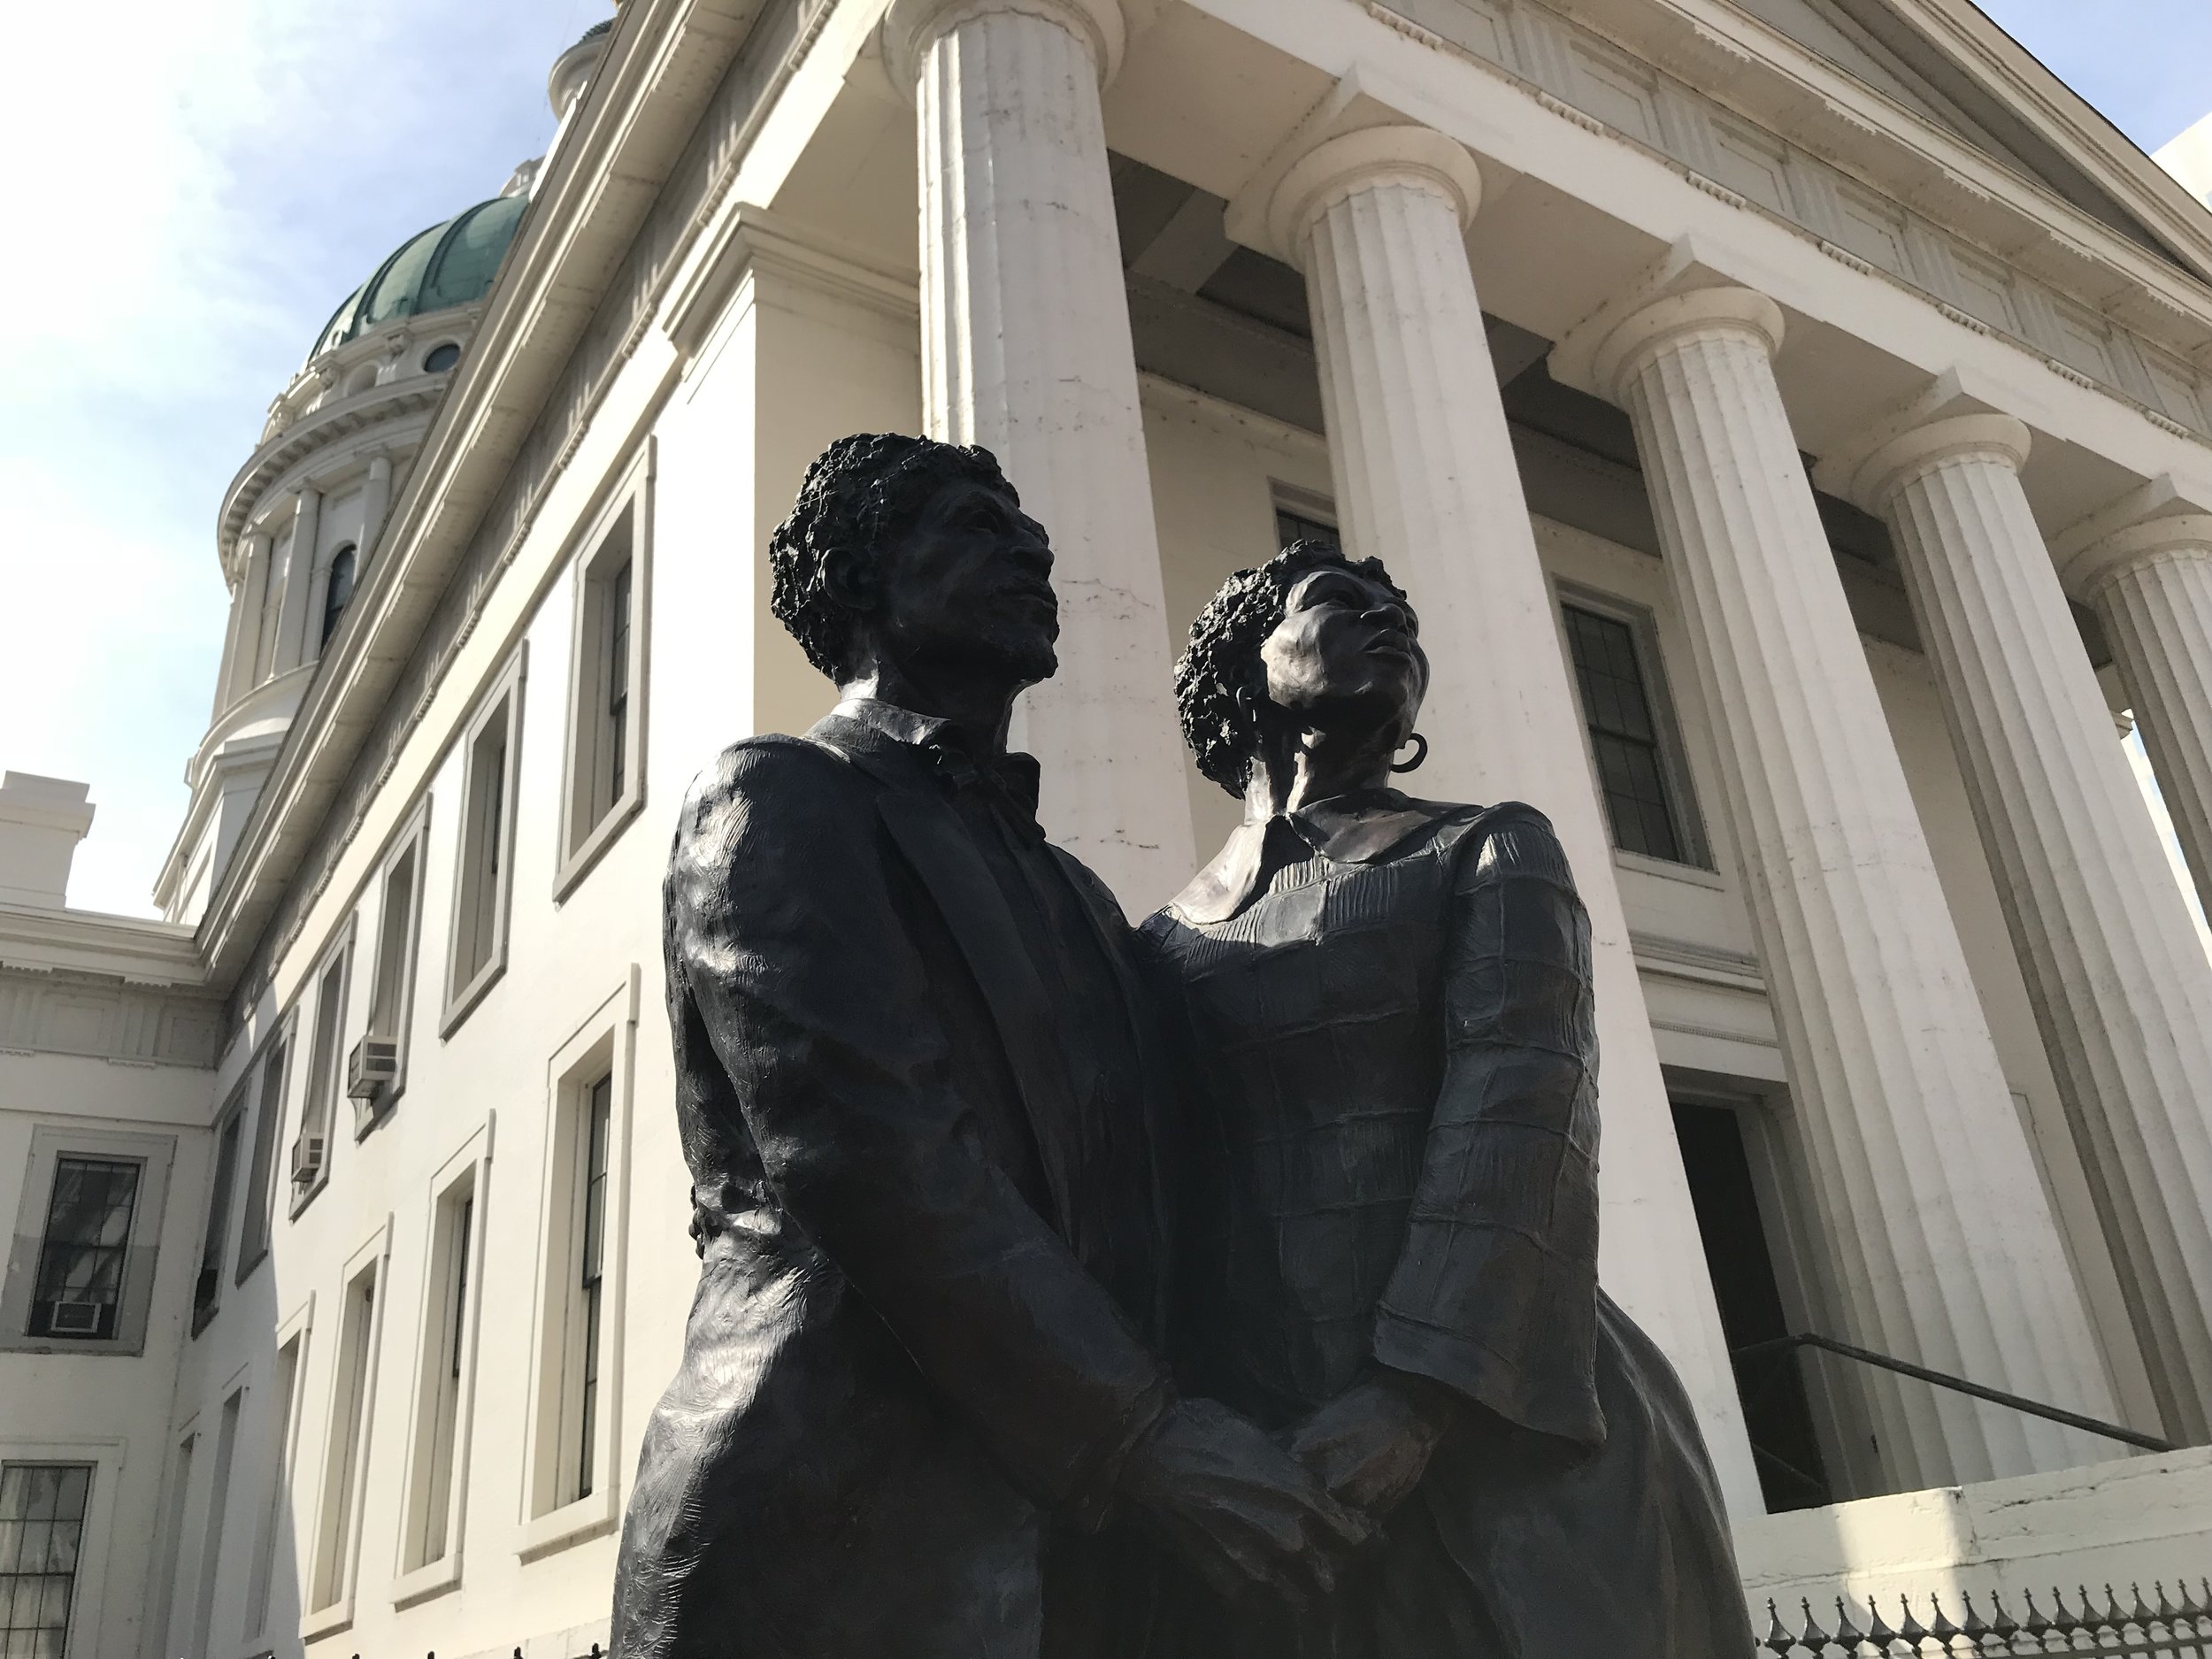  Dred Scott and his wife, portrayed in front of the St. Louis courthouse where he challenged his status as a slave. 